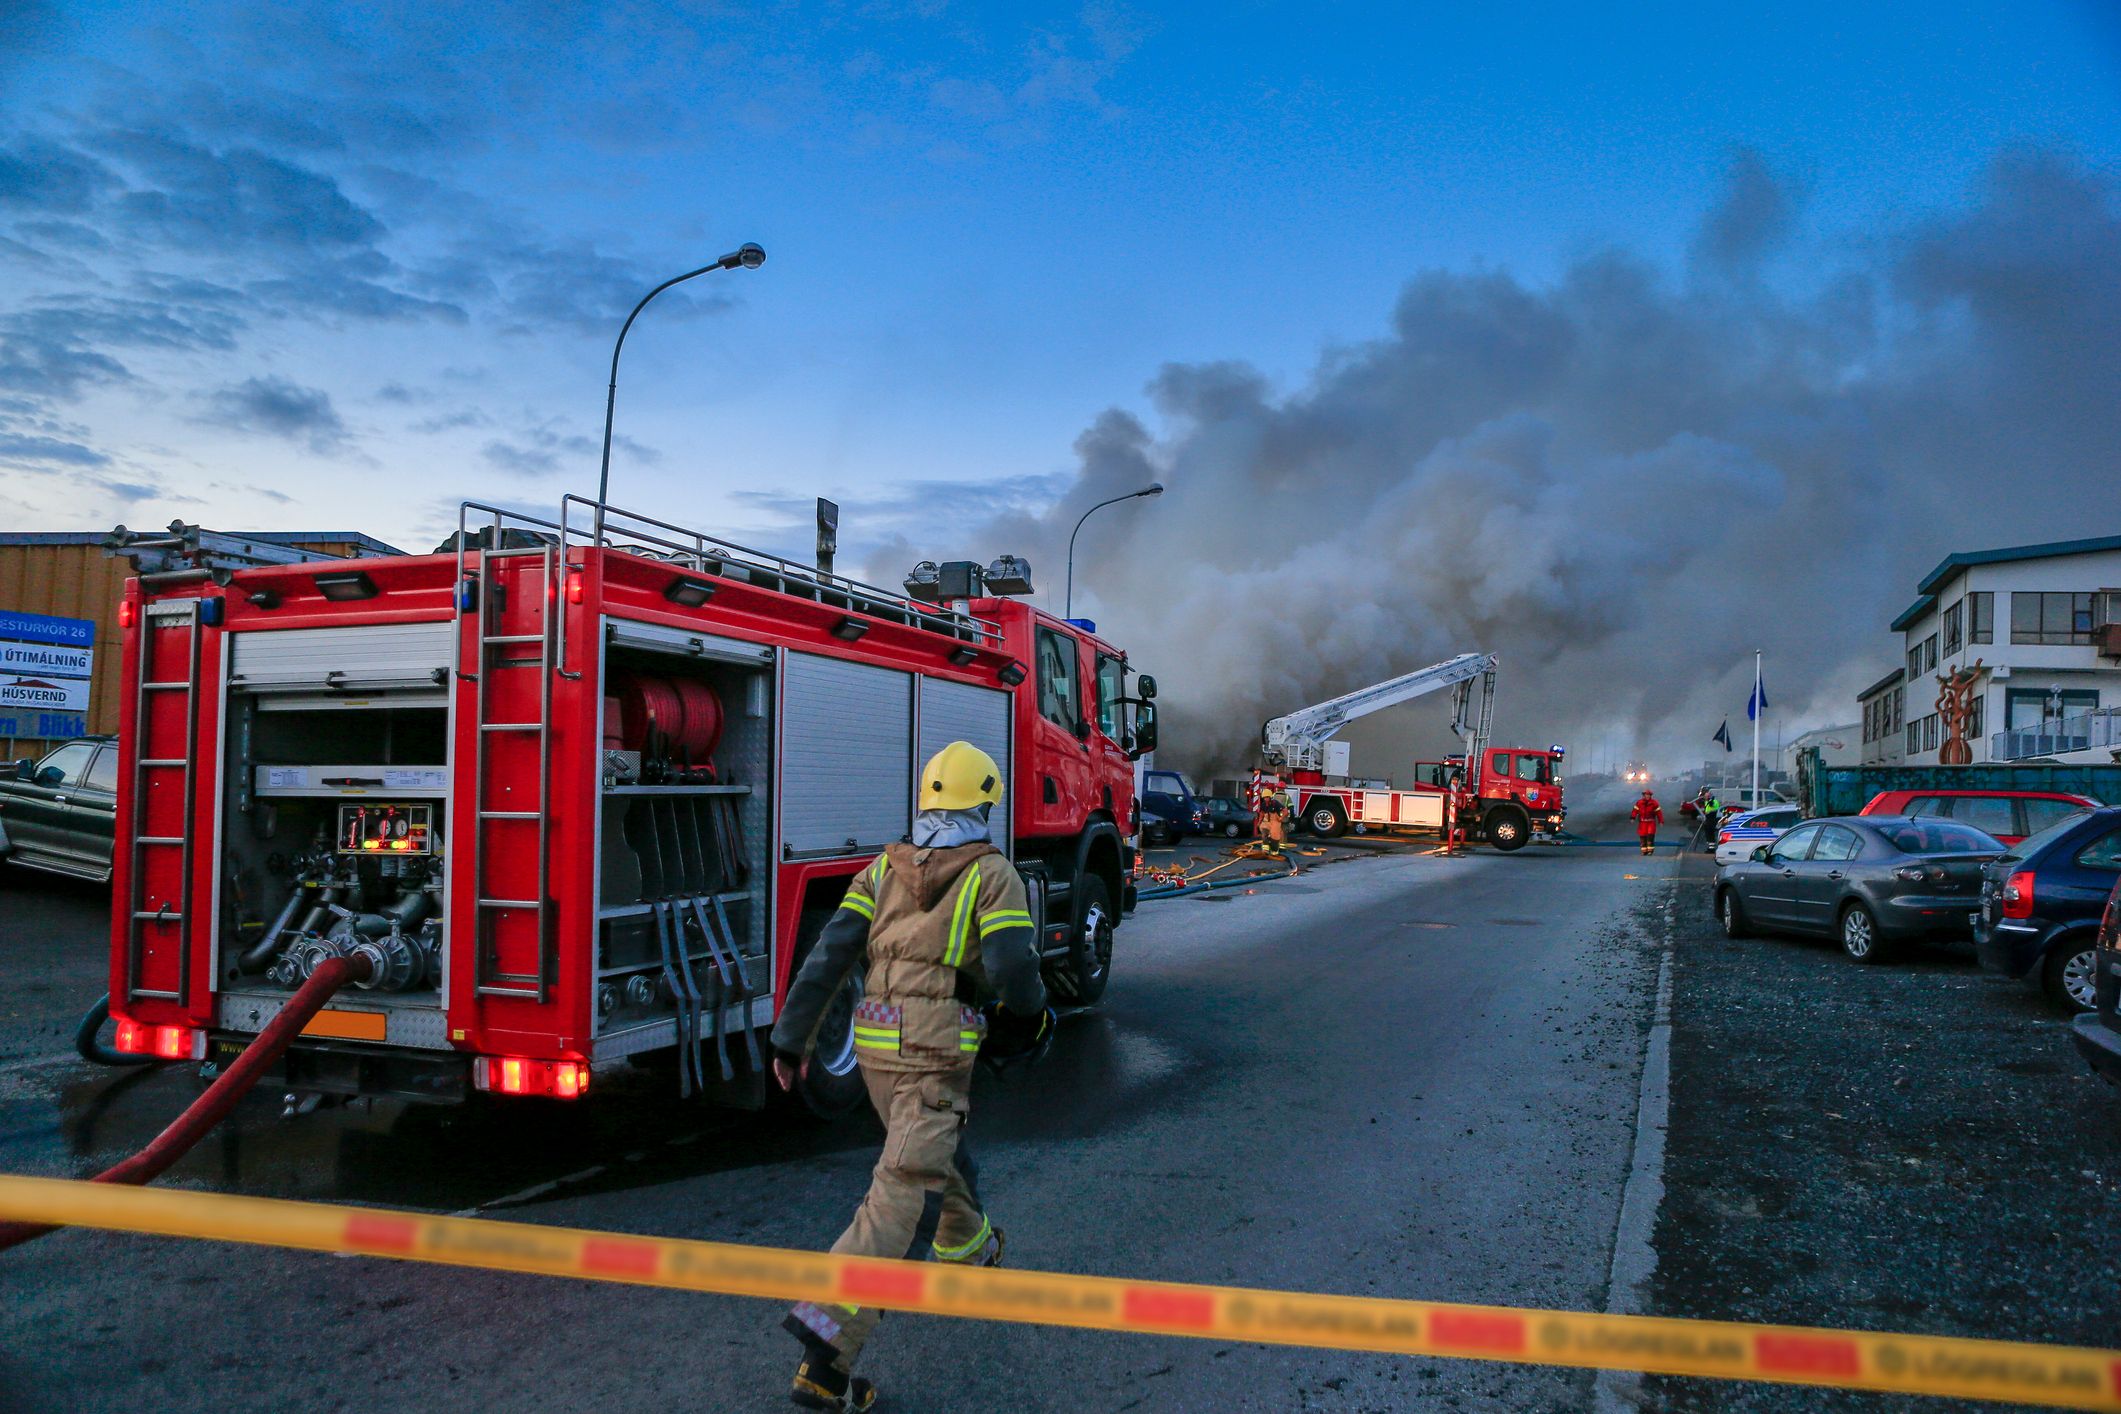 Firefighters respond to a fire emergency. | Source: Getty Images